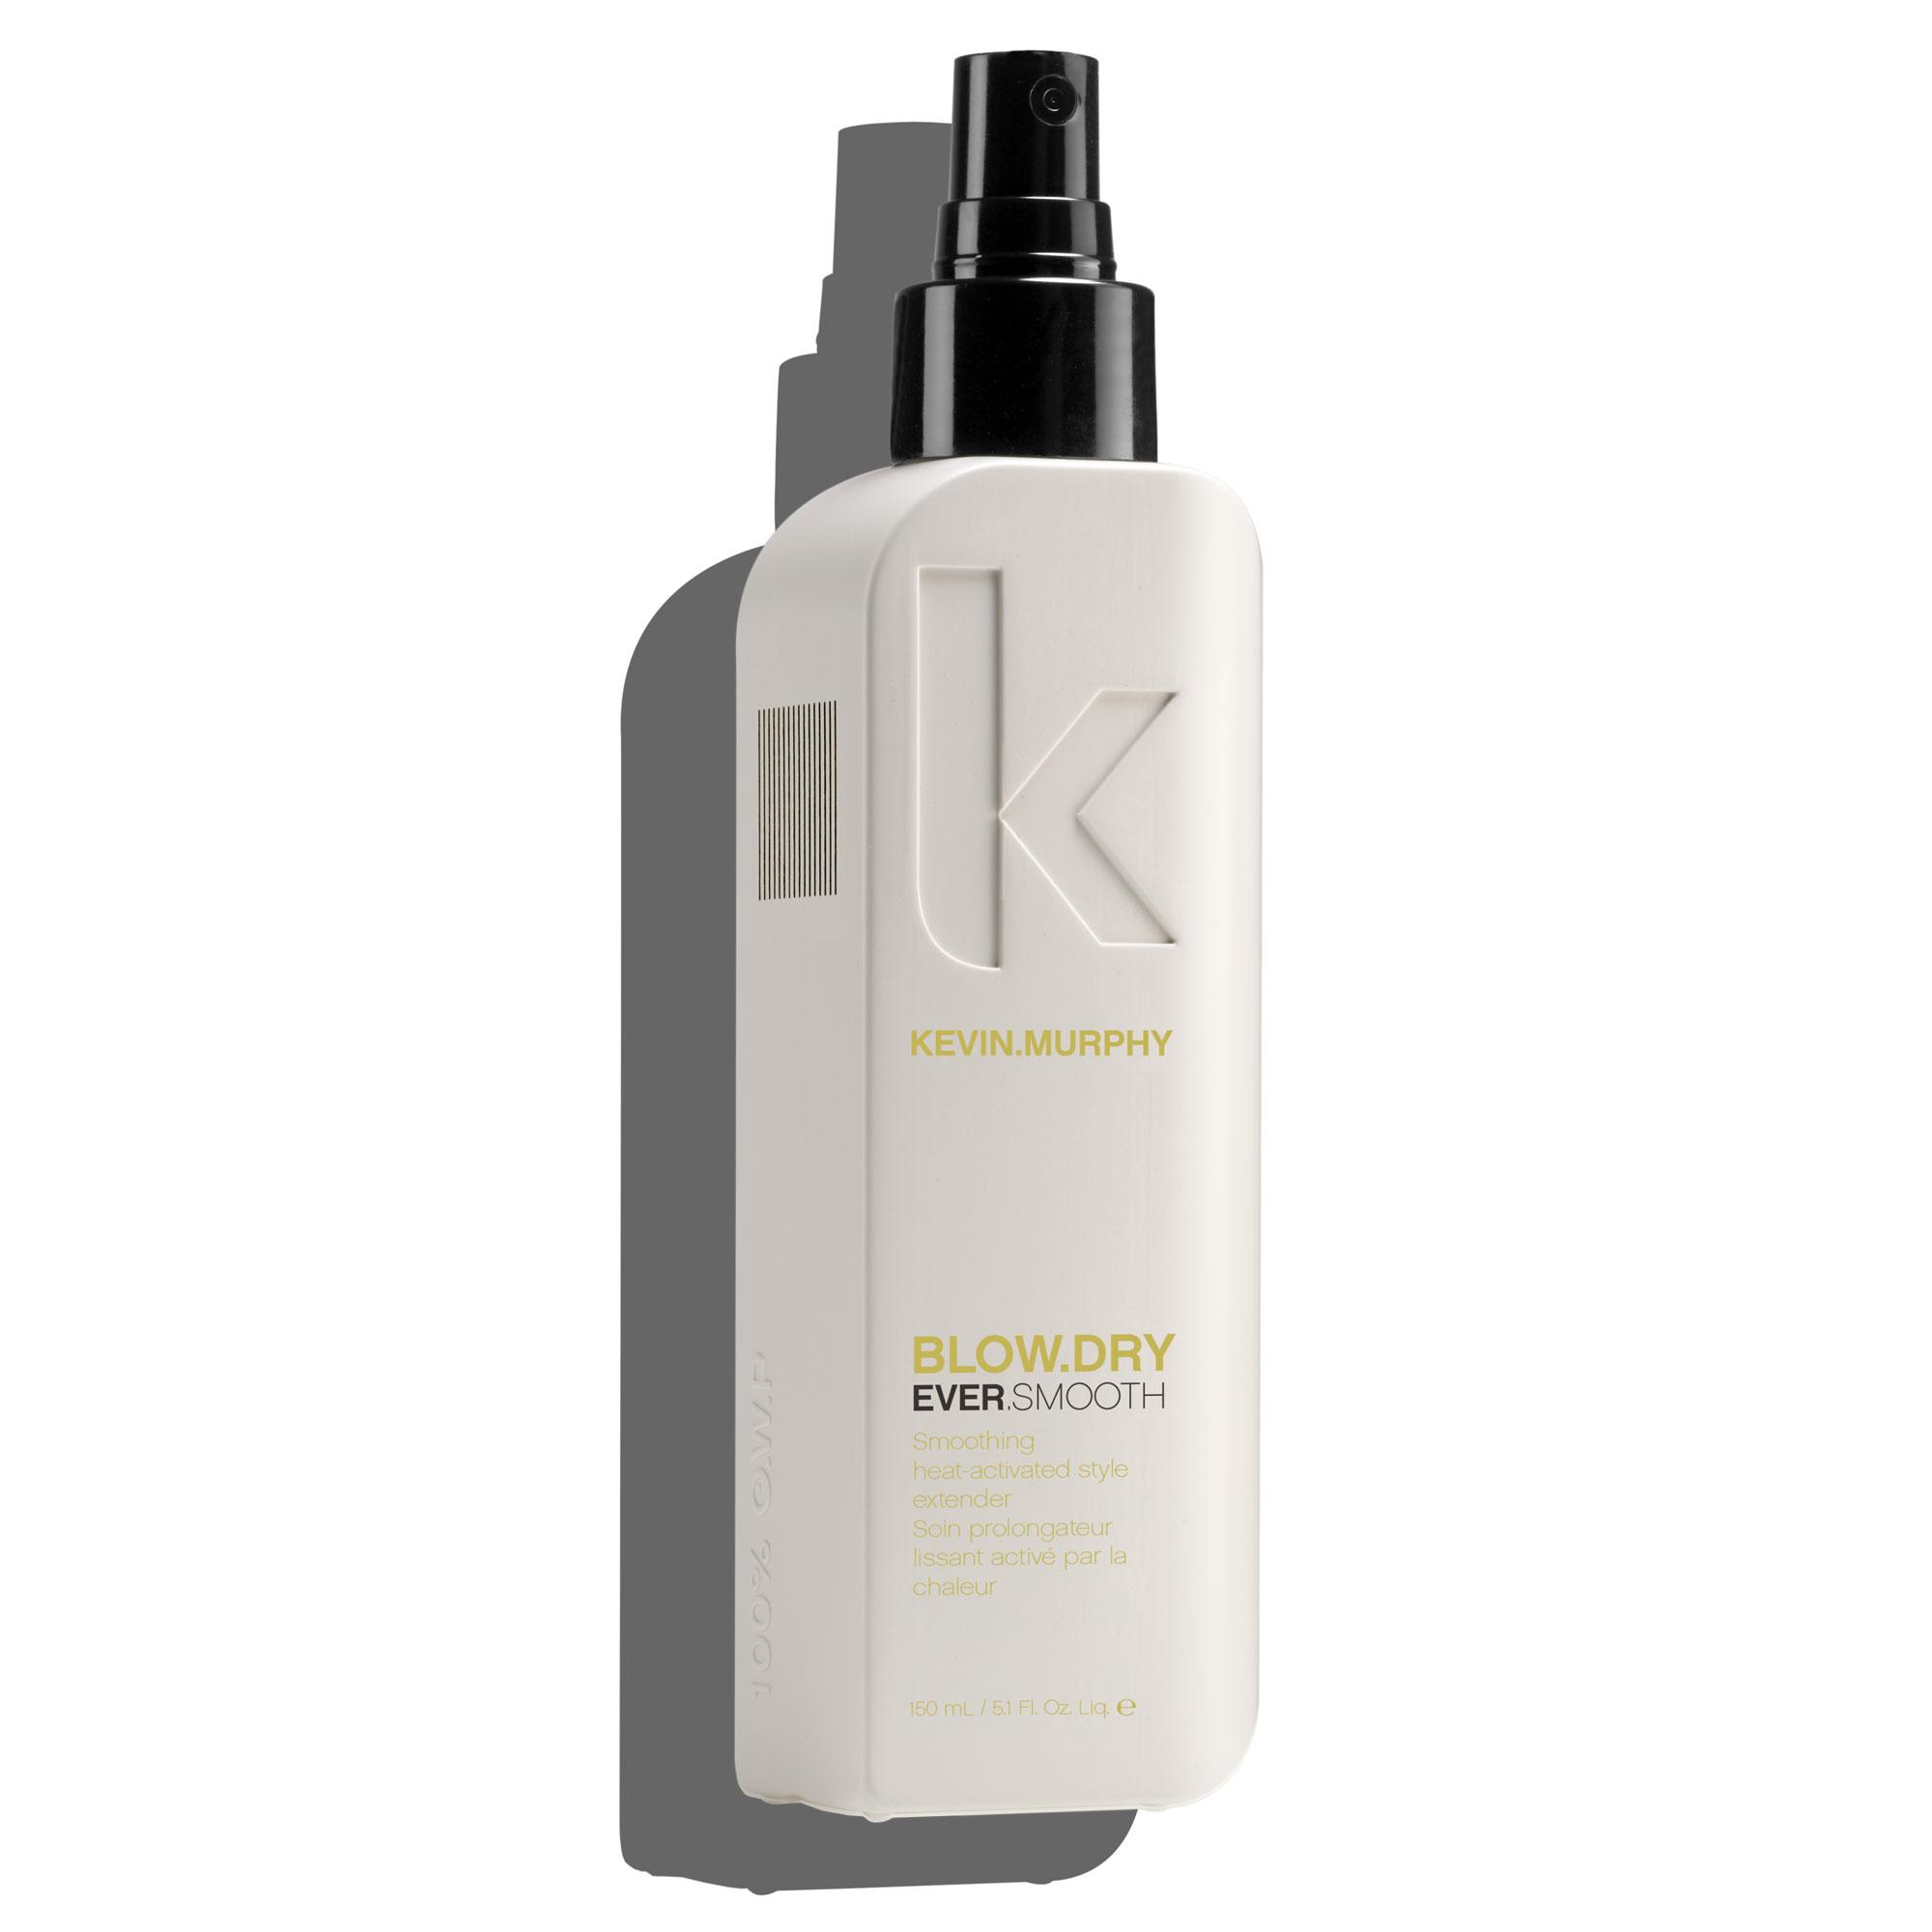 KEVIN.MURPHY BLOW.DRY EVER.SMOOTH 5.1oz